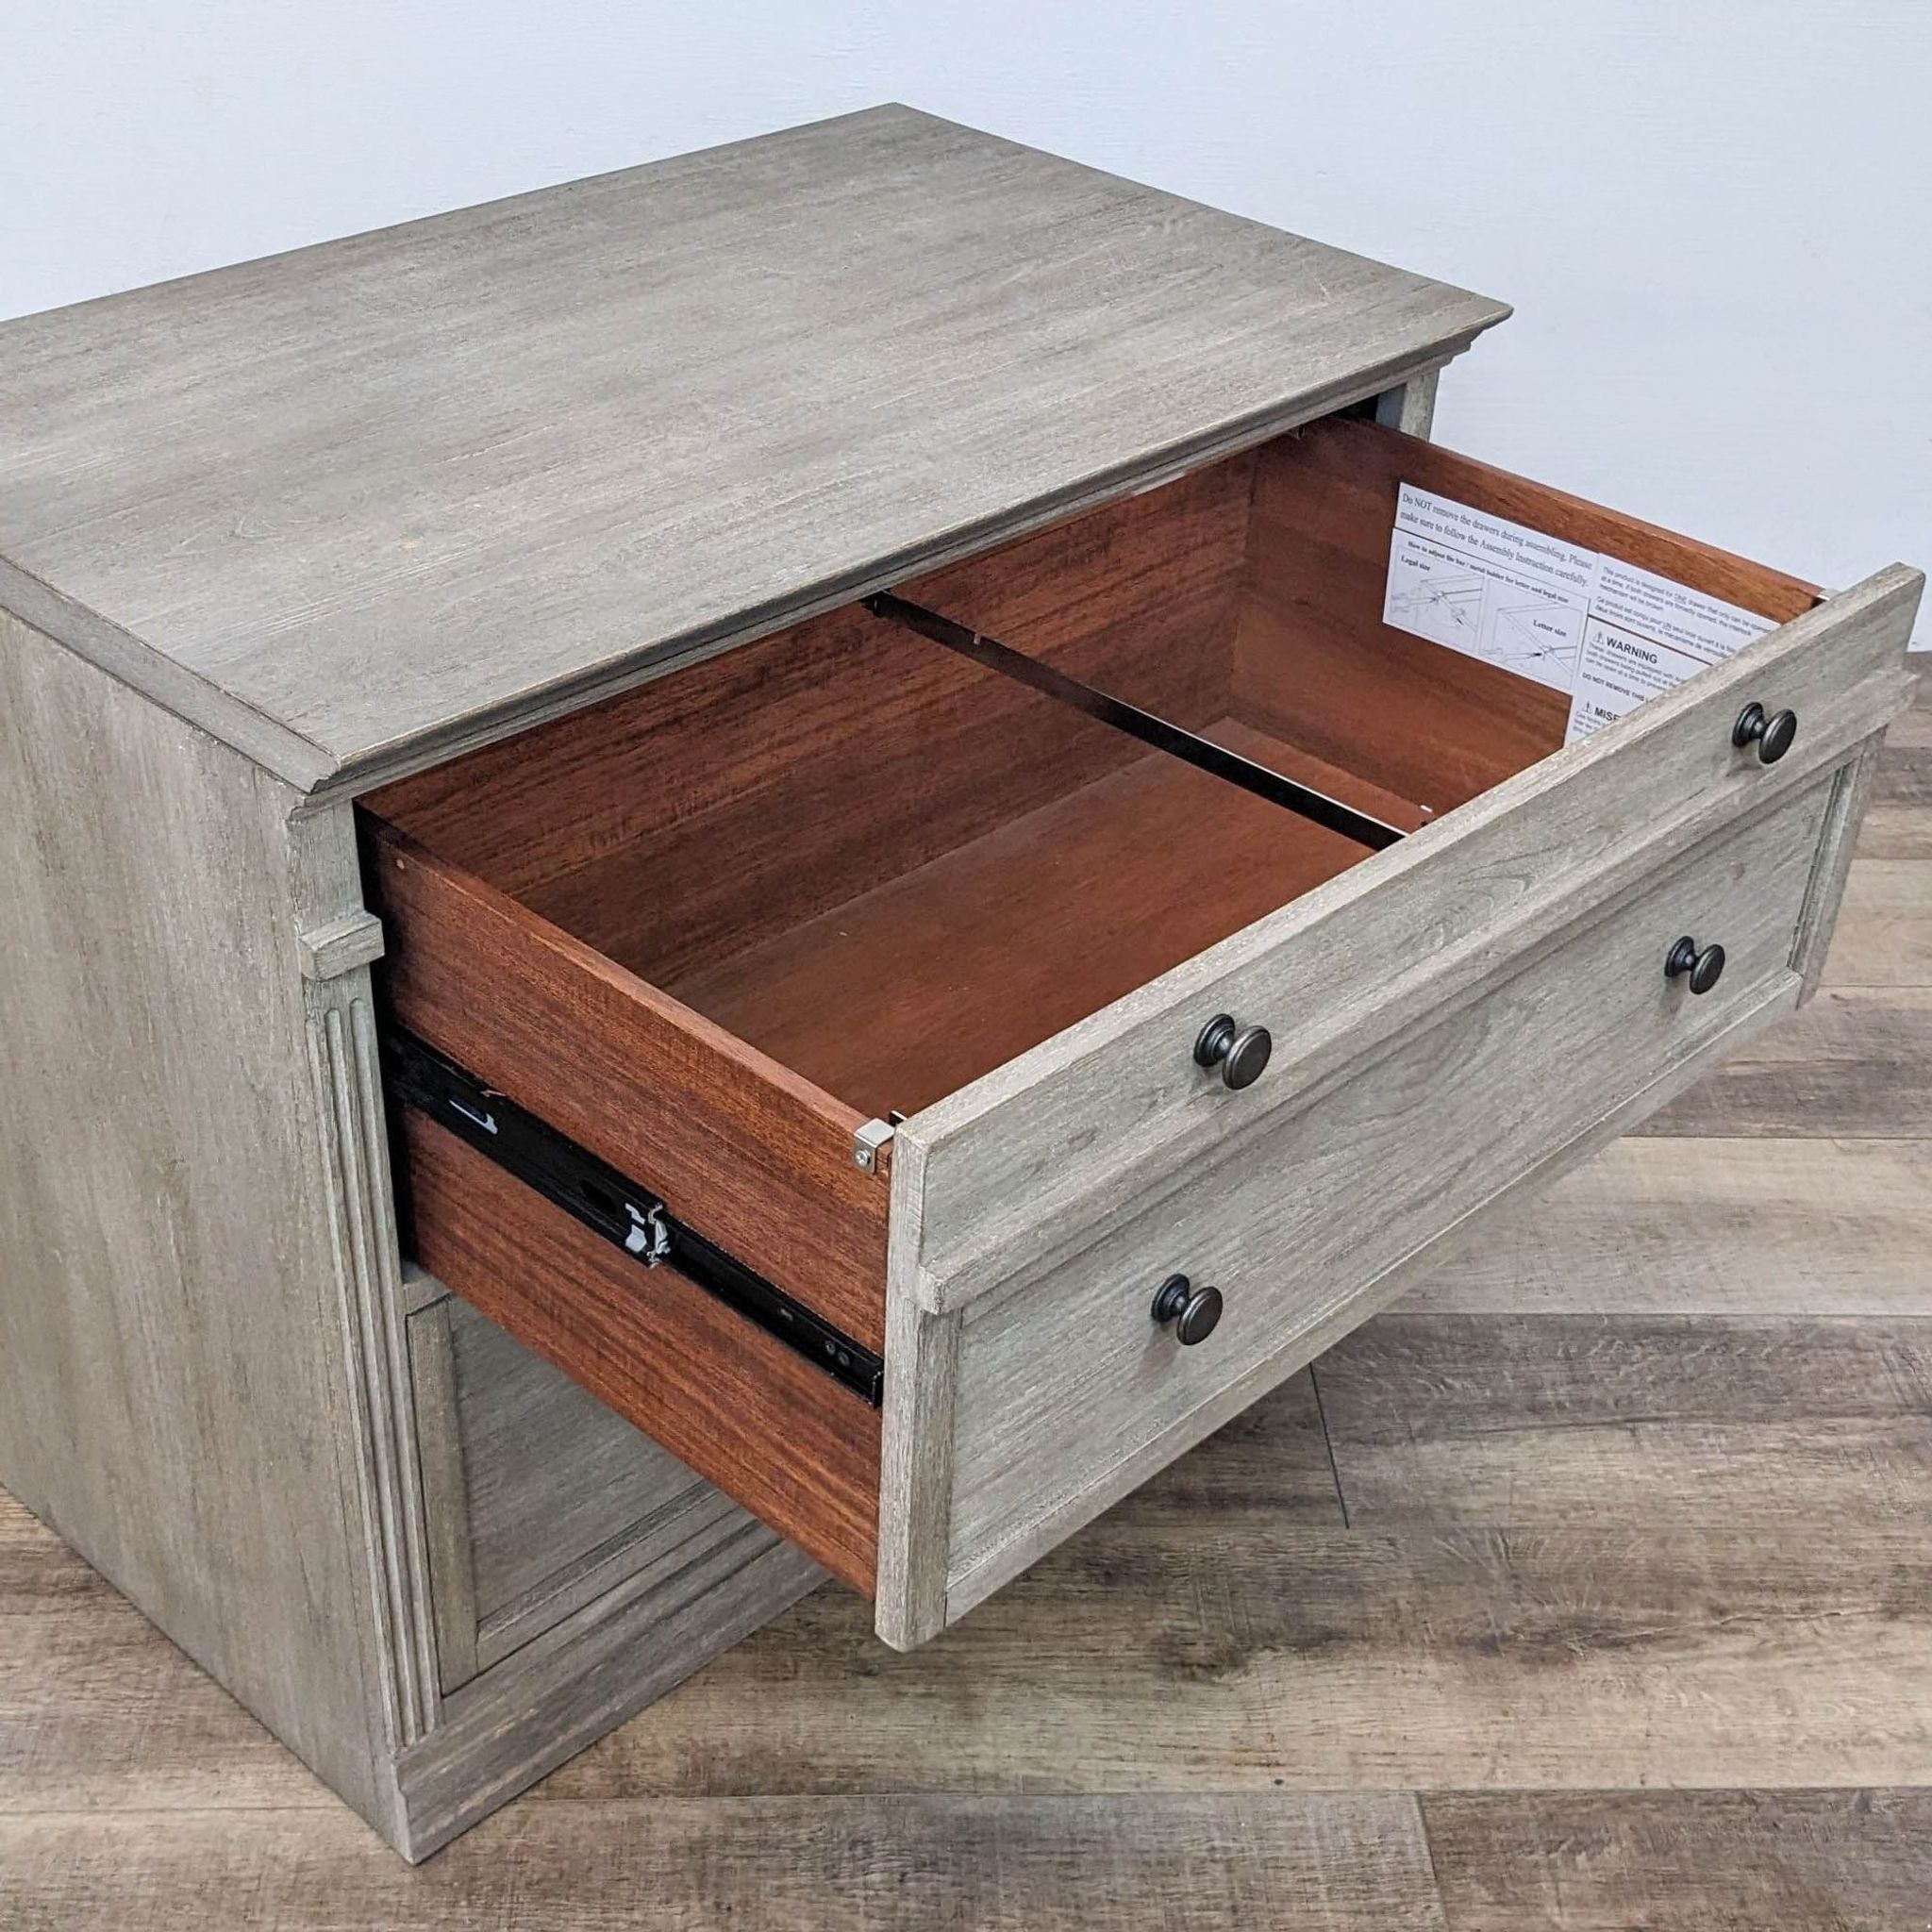 Open drawer view of Livingston file cabinet by Pottery Barn, displaying English dovetail joinery and ball bearing glides.